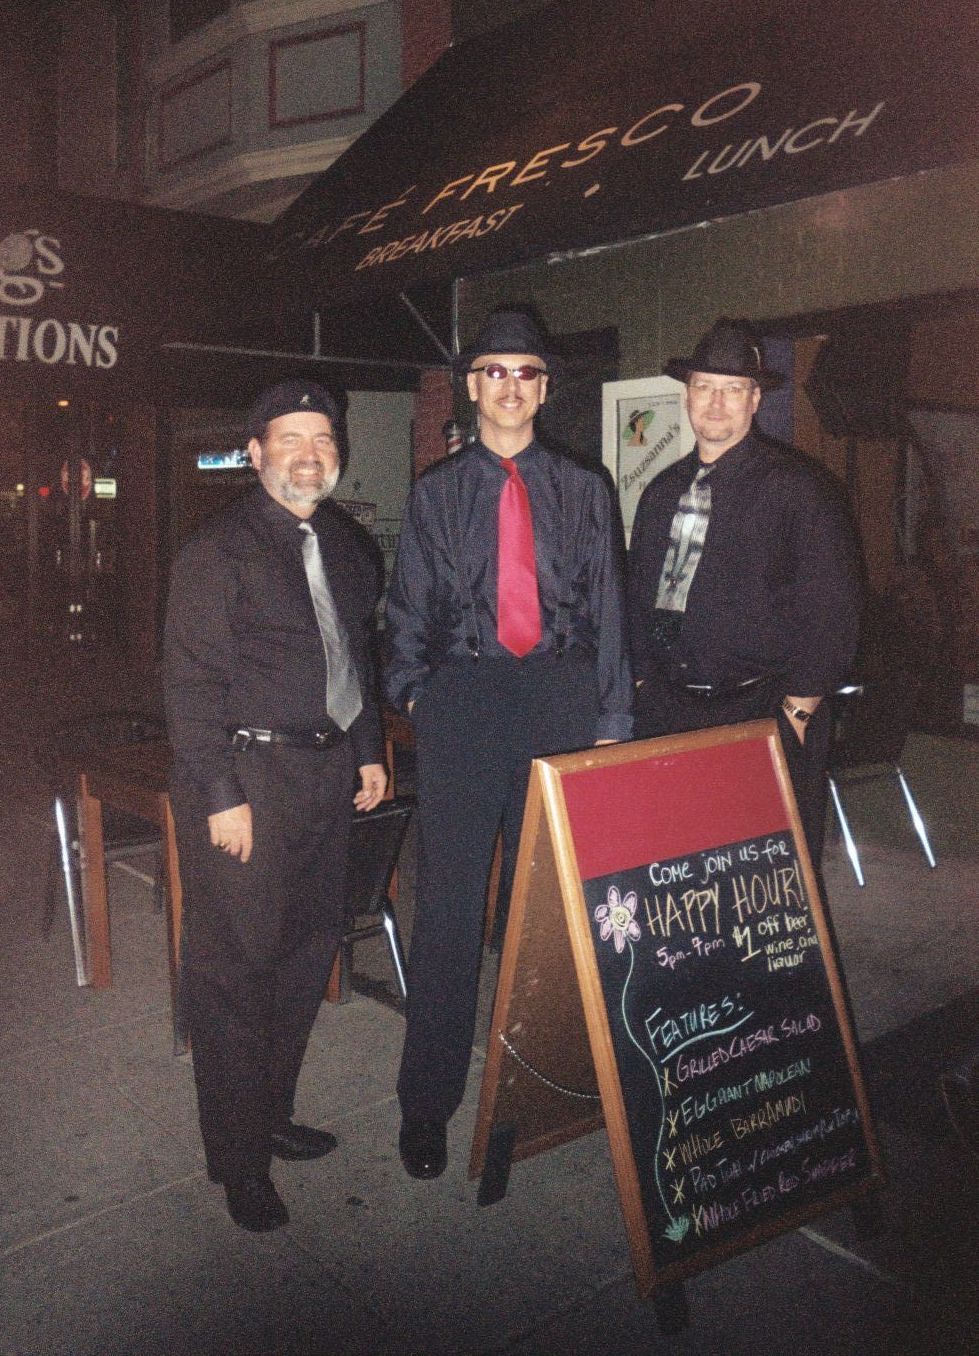 The Band in front of Cafe Fresco on Second Street in Harrisburg
April 2006
